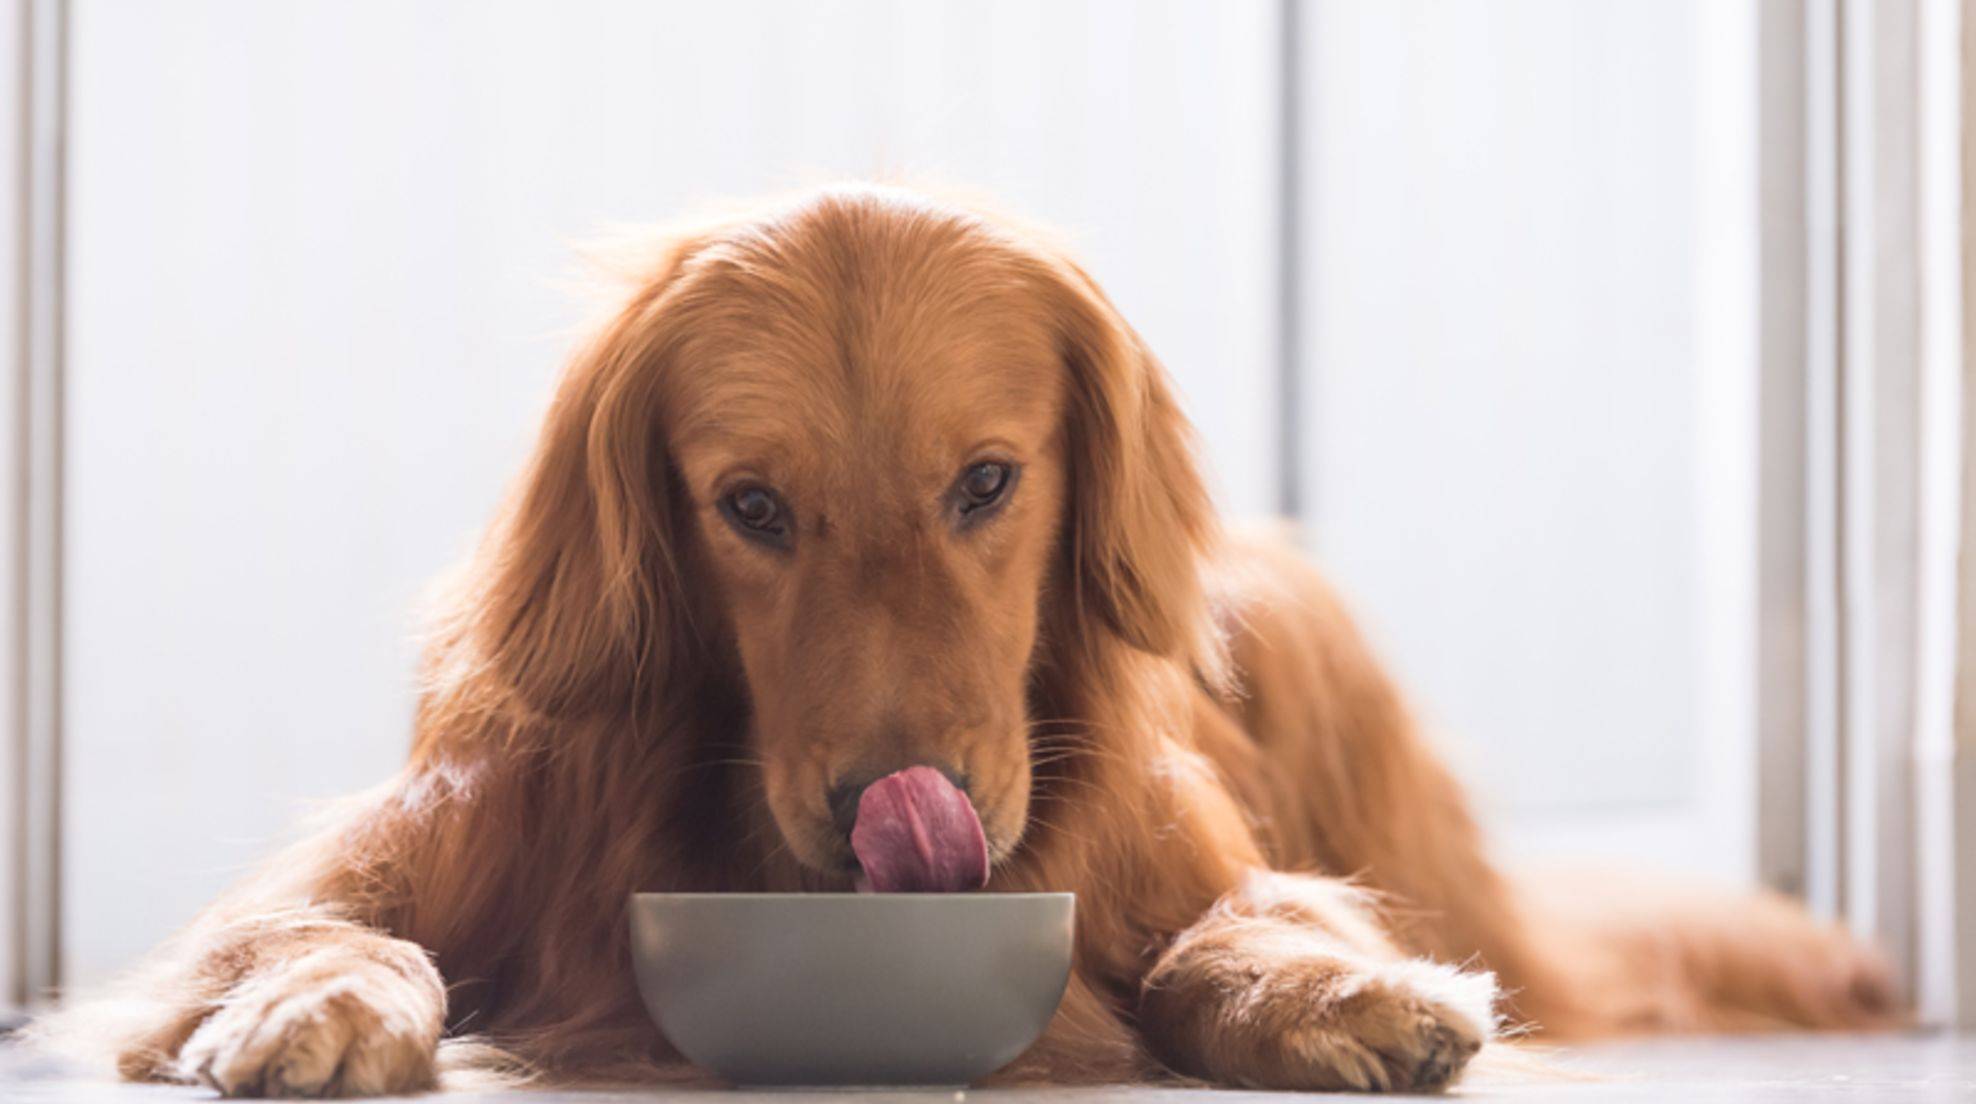 When the dog has diarrhea: What you can feed